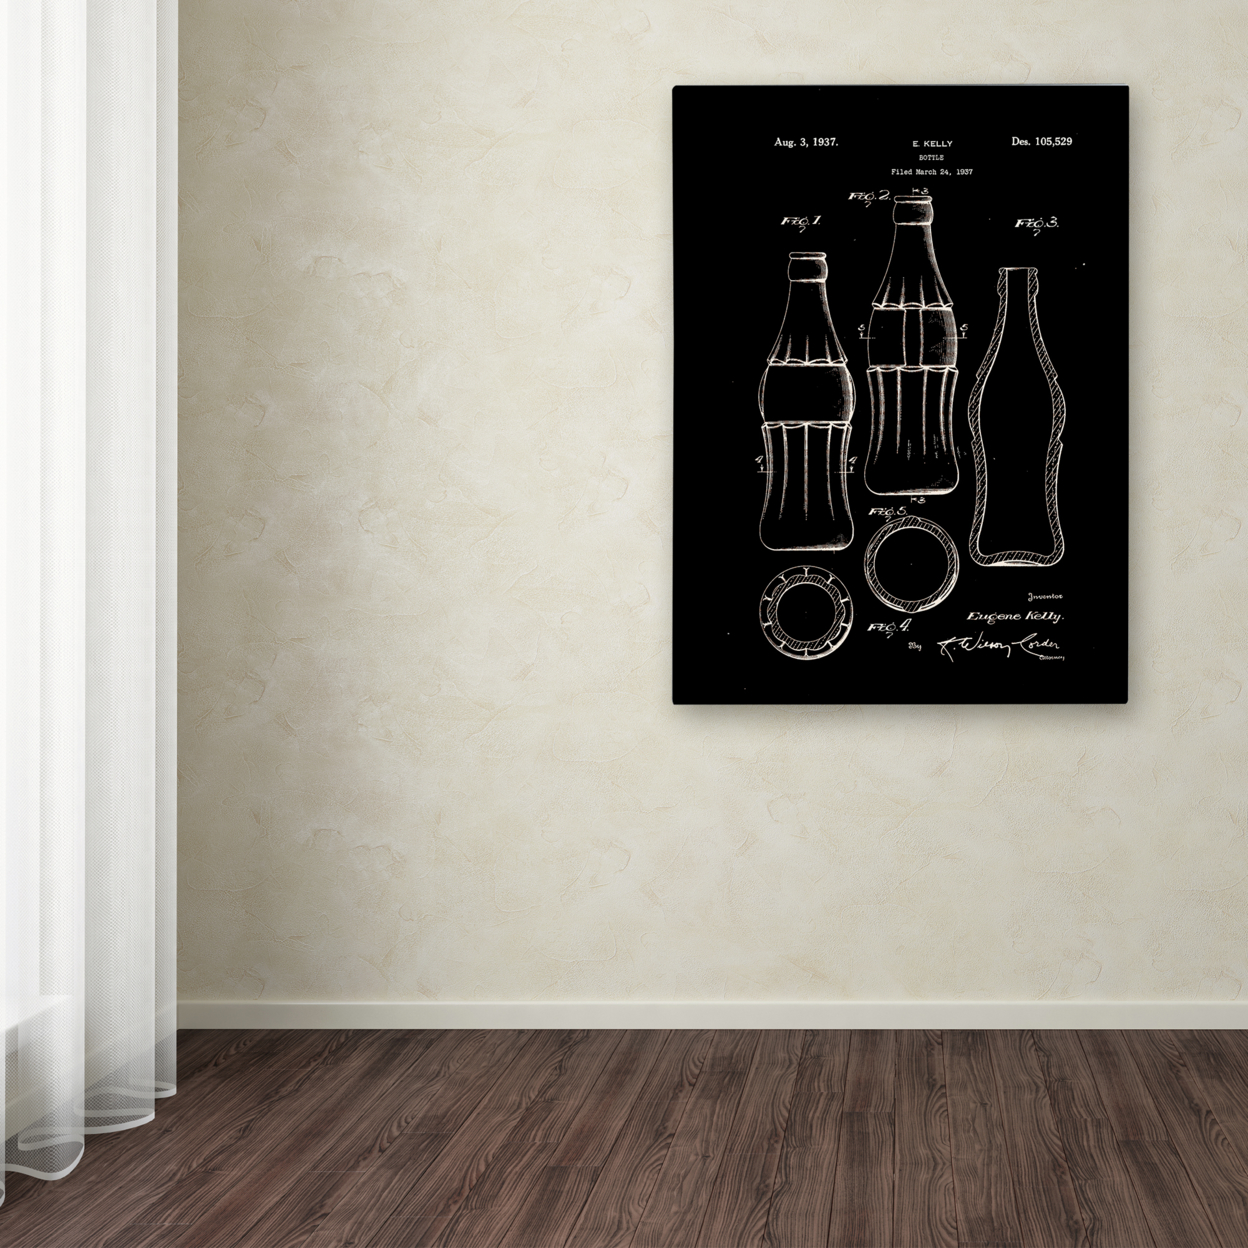 Claire Doherty 'Coca Cola Bottle Patent 1937 Black' Canvas Wall Art 35 X 47 Inches